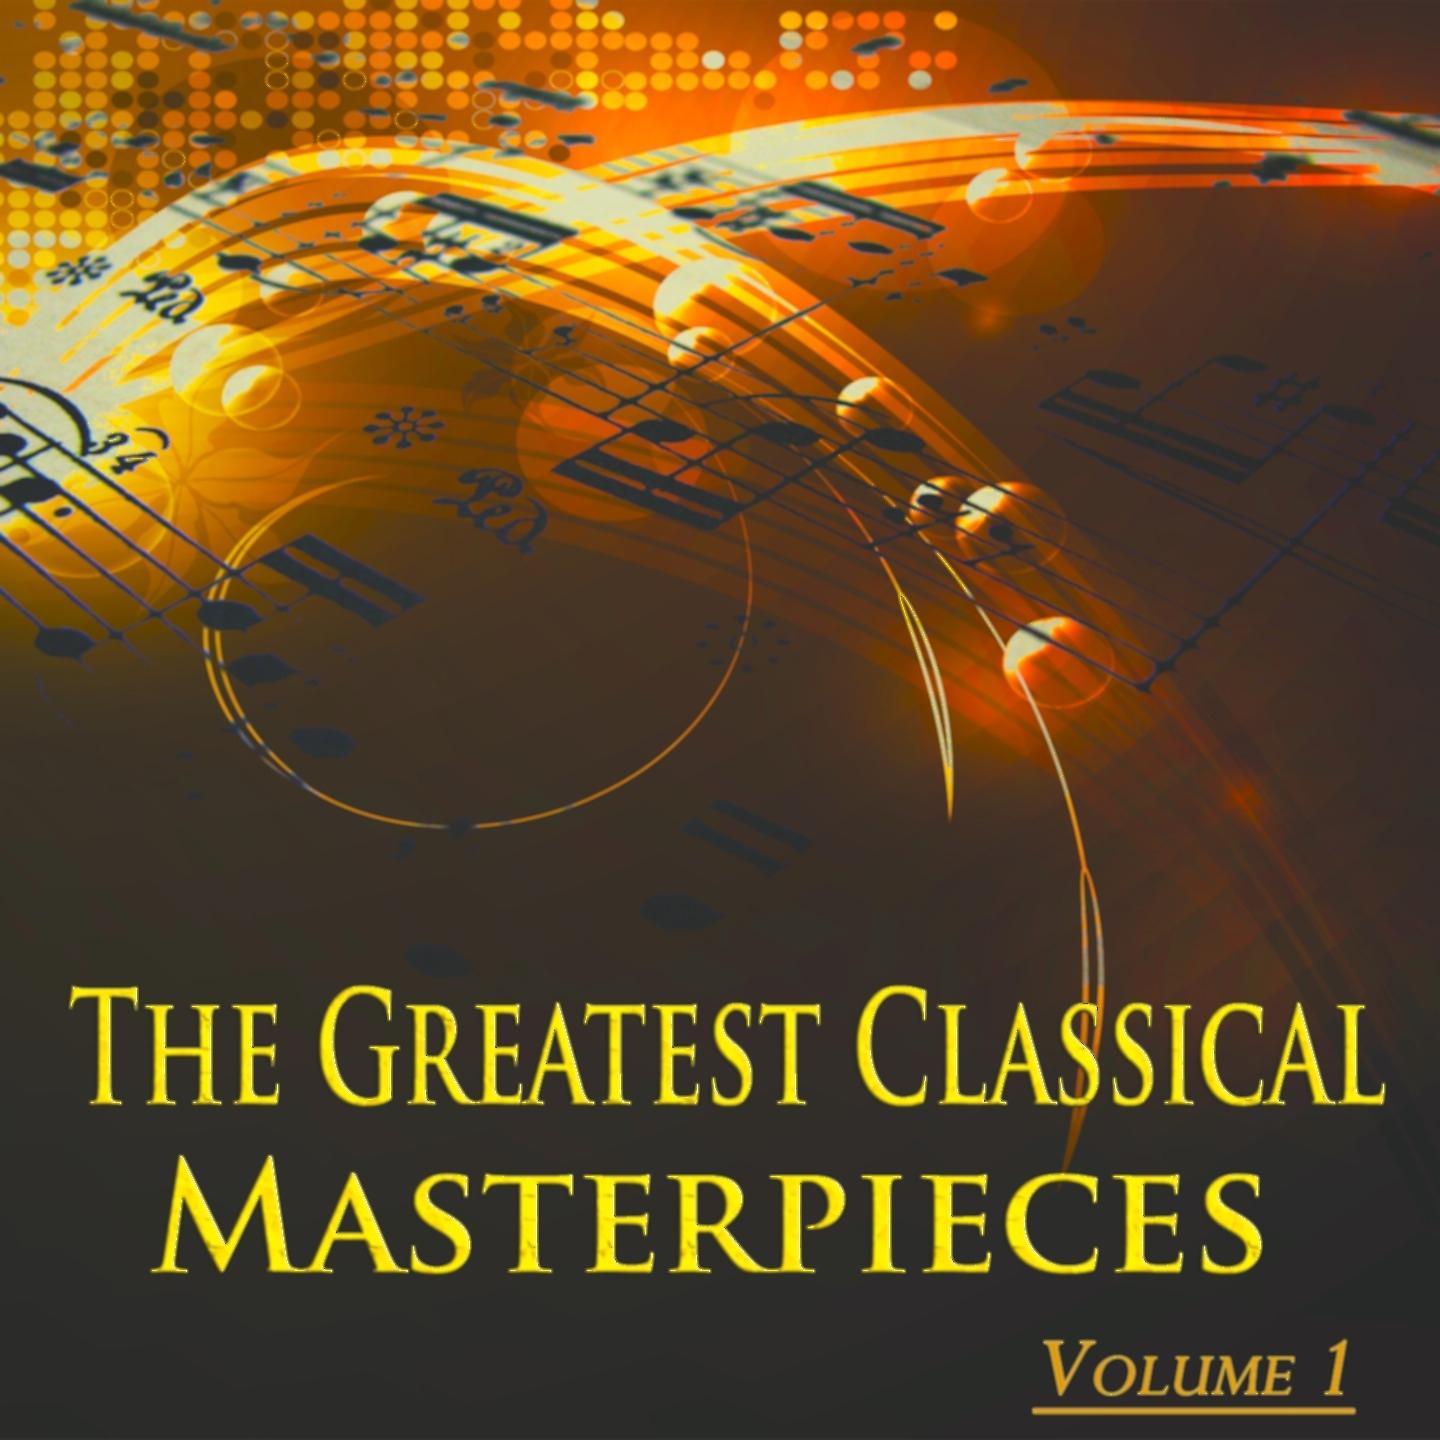 The Greatest Classical Masterpieces, Vol. 1